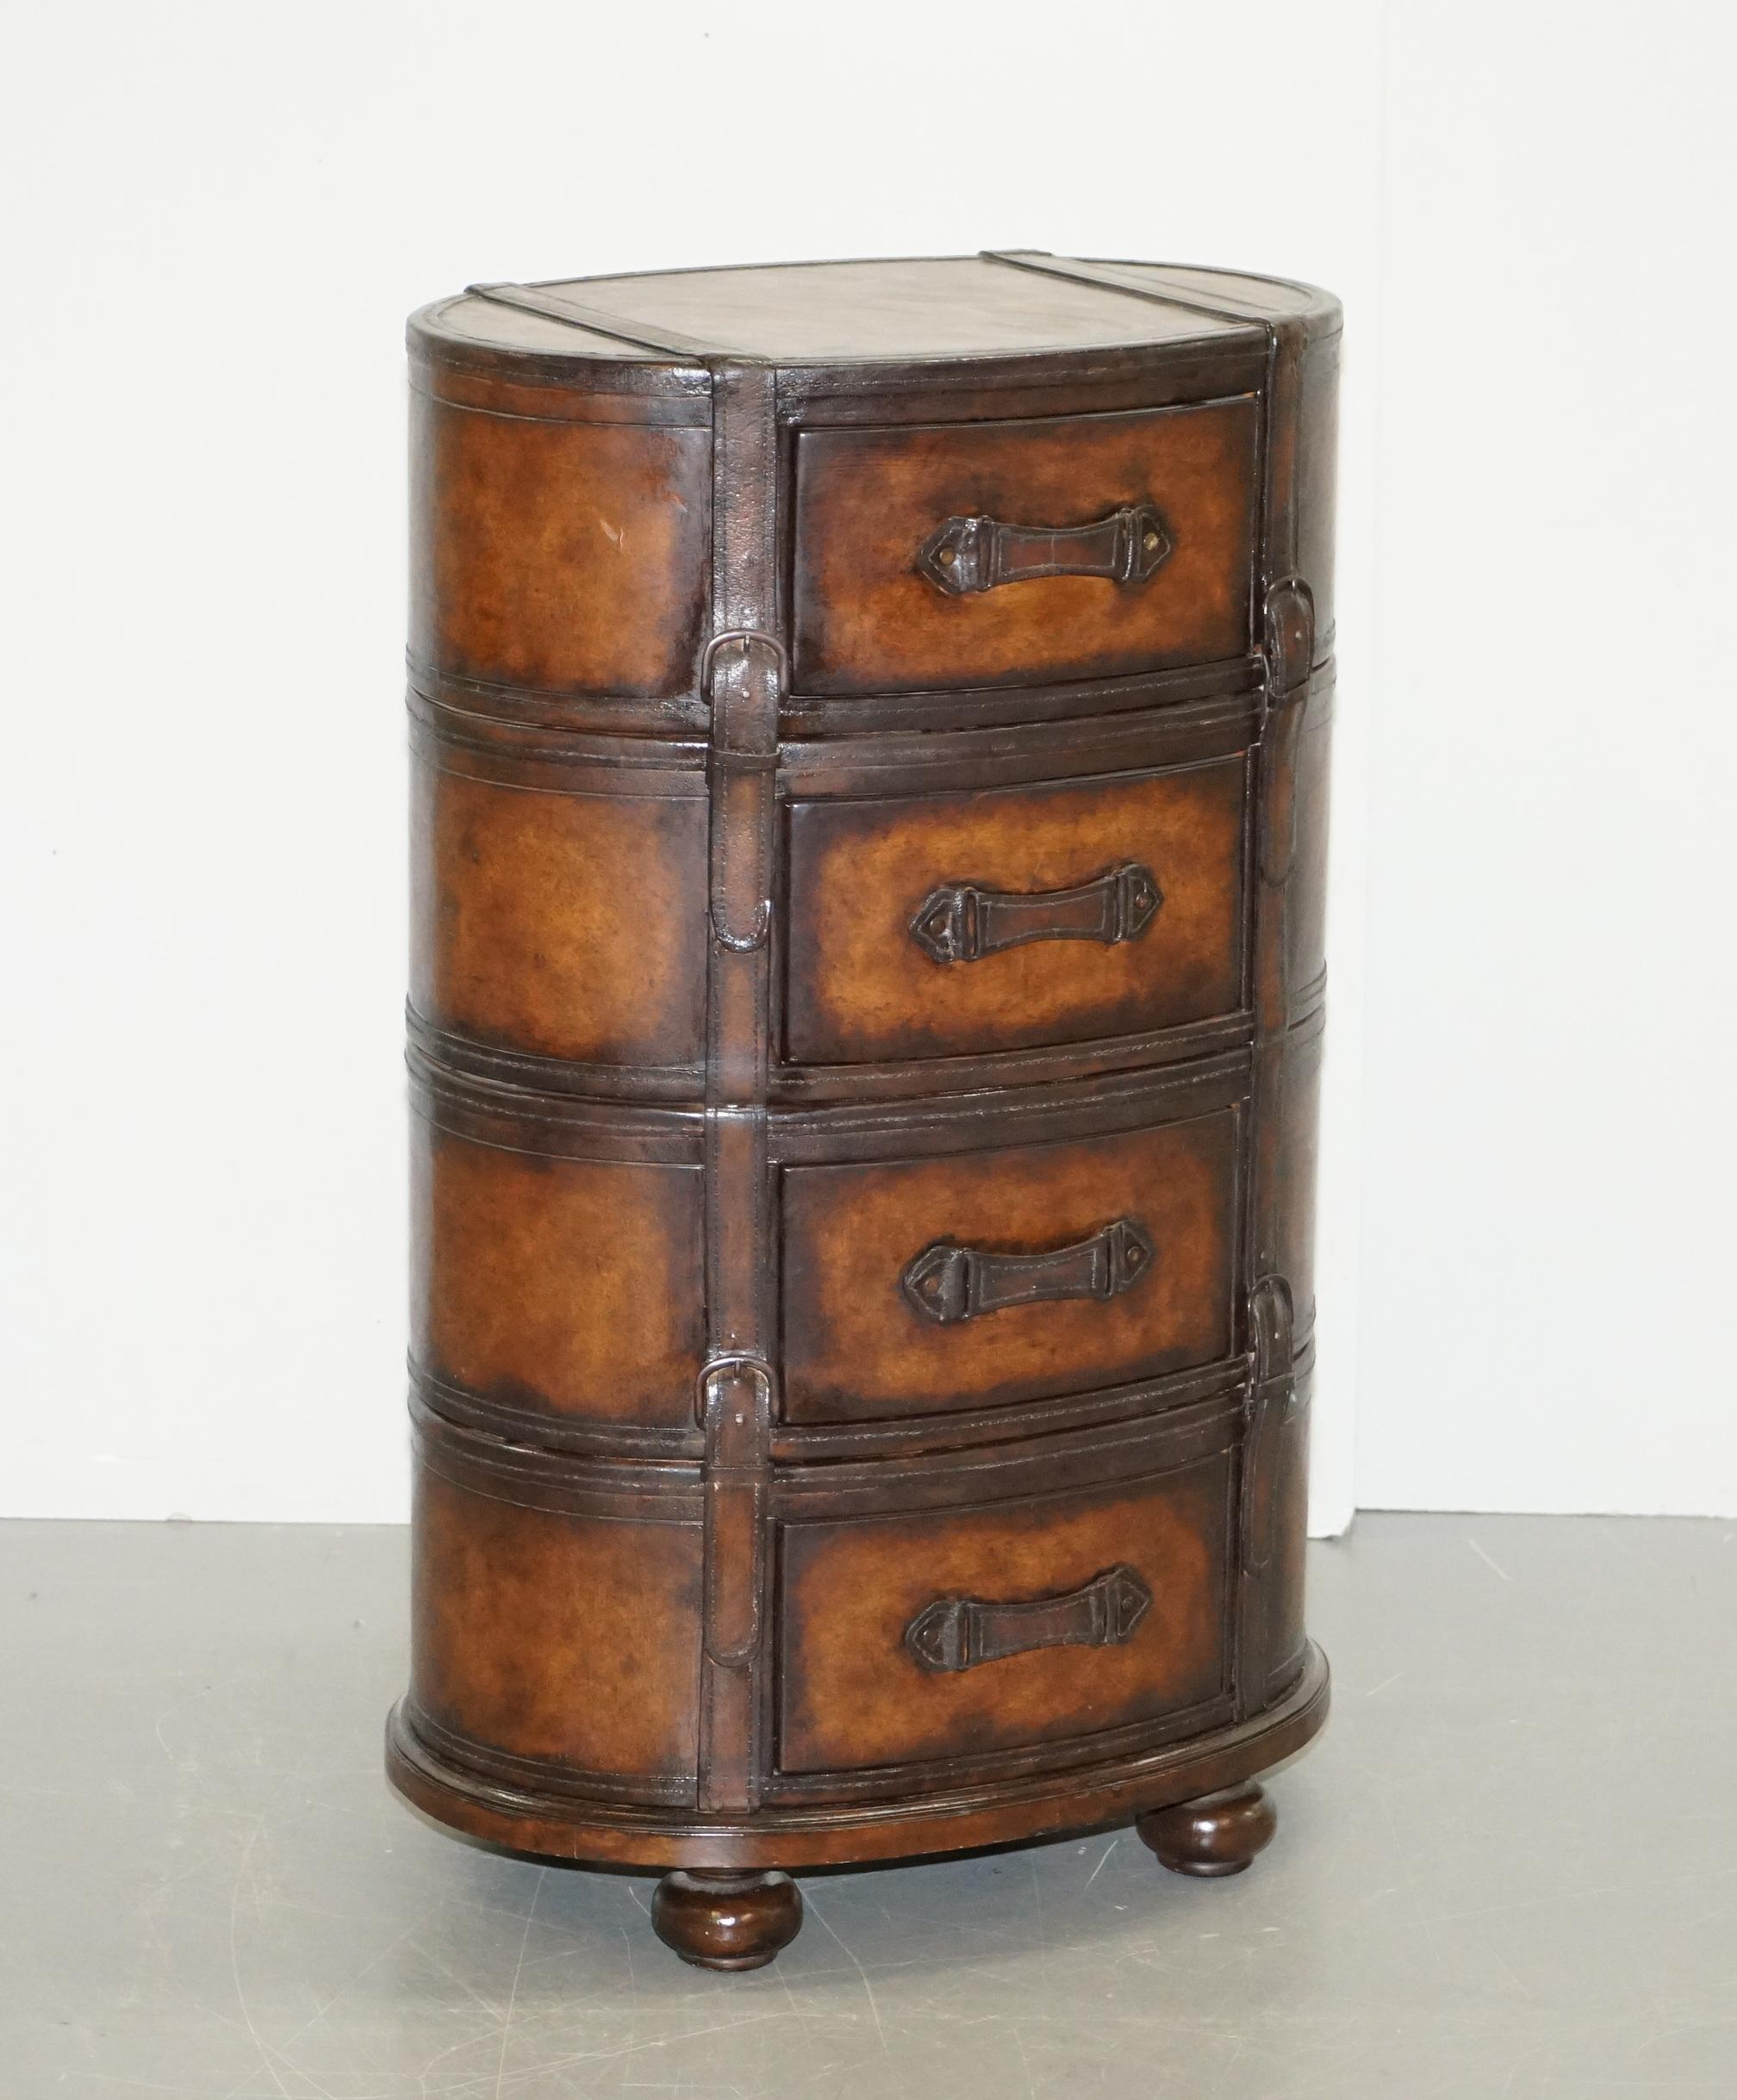 We are delighted to this lovely fully restored age hand dyed brown leather luggage tallboy chest of drawers

This is a very good looking and well-made chest of drawers, upholstered with thick leather all-over which has been hand dyed this rich